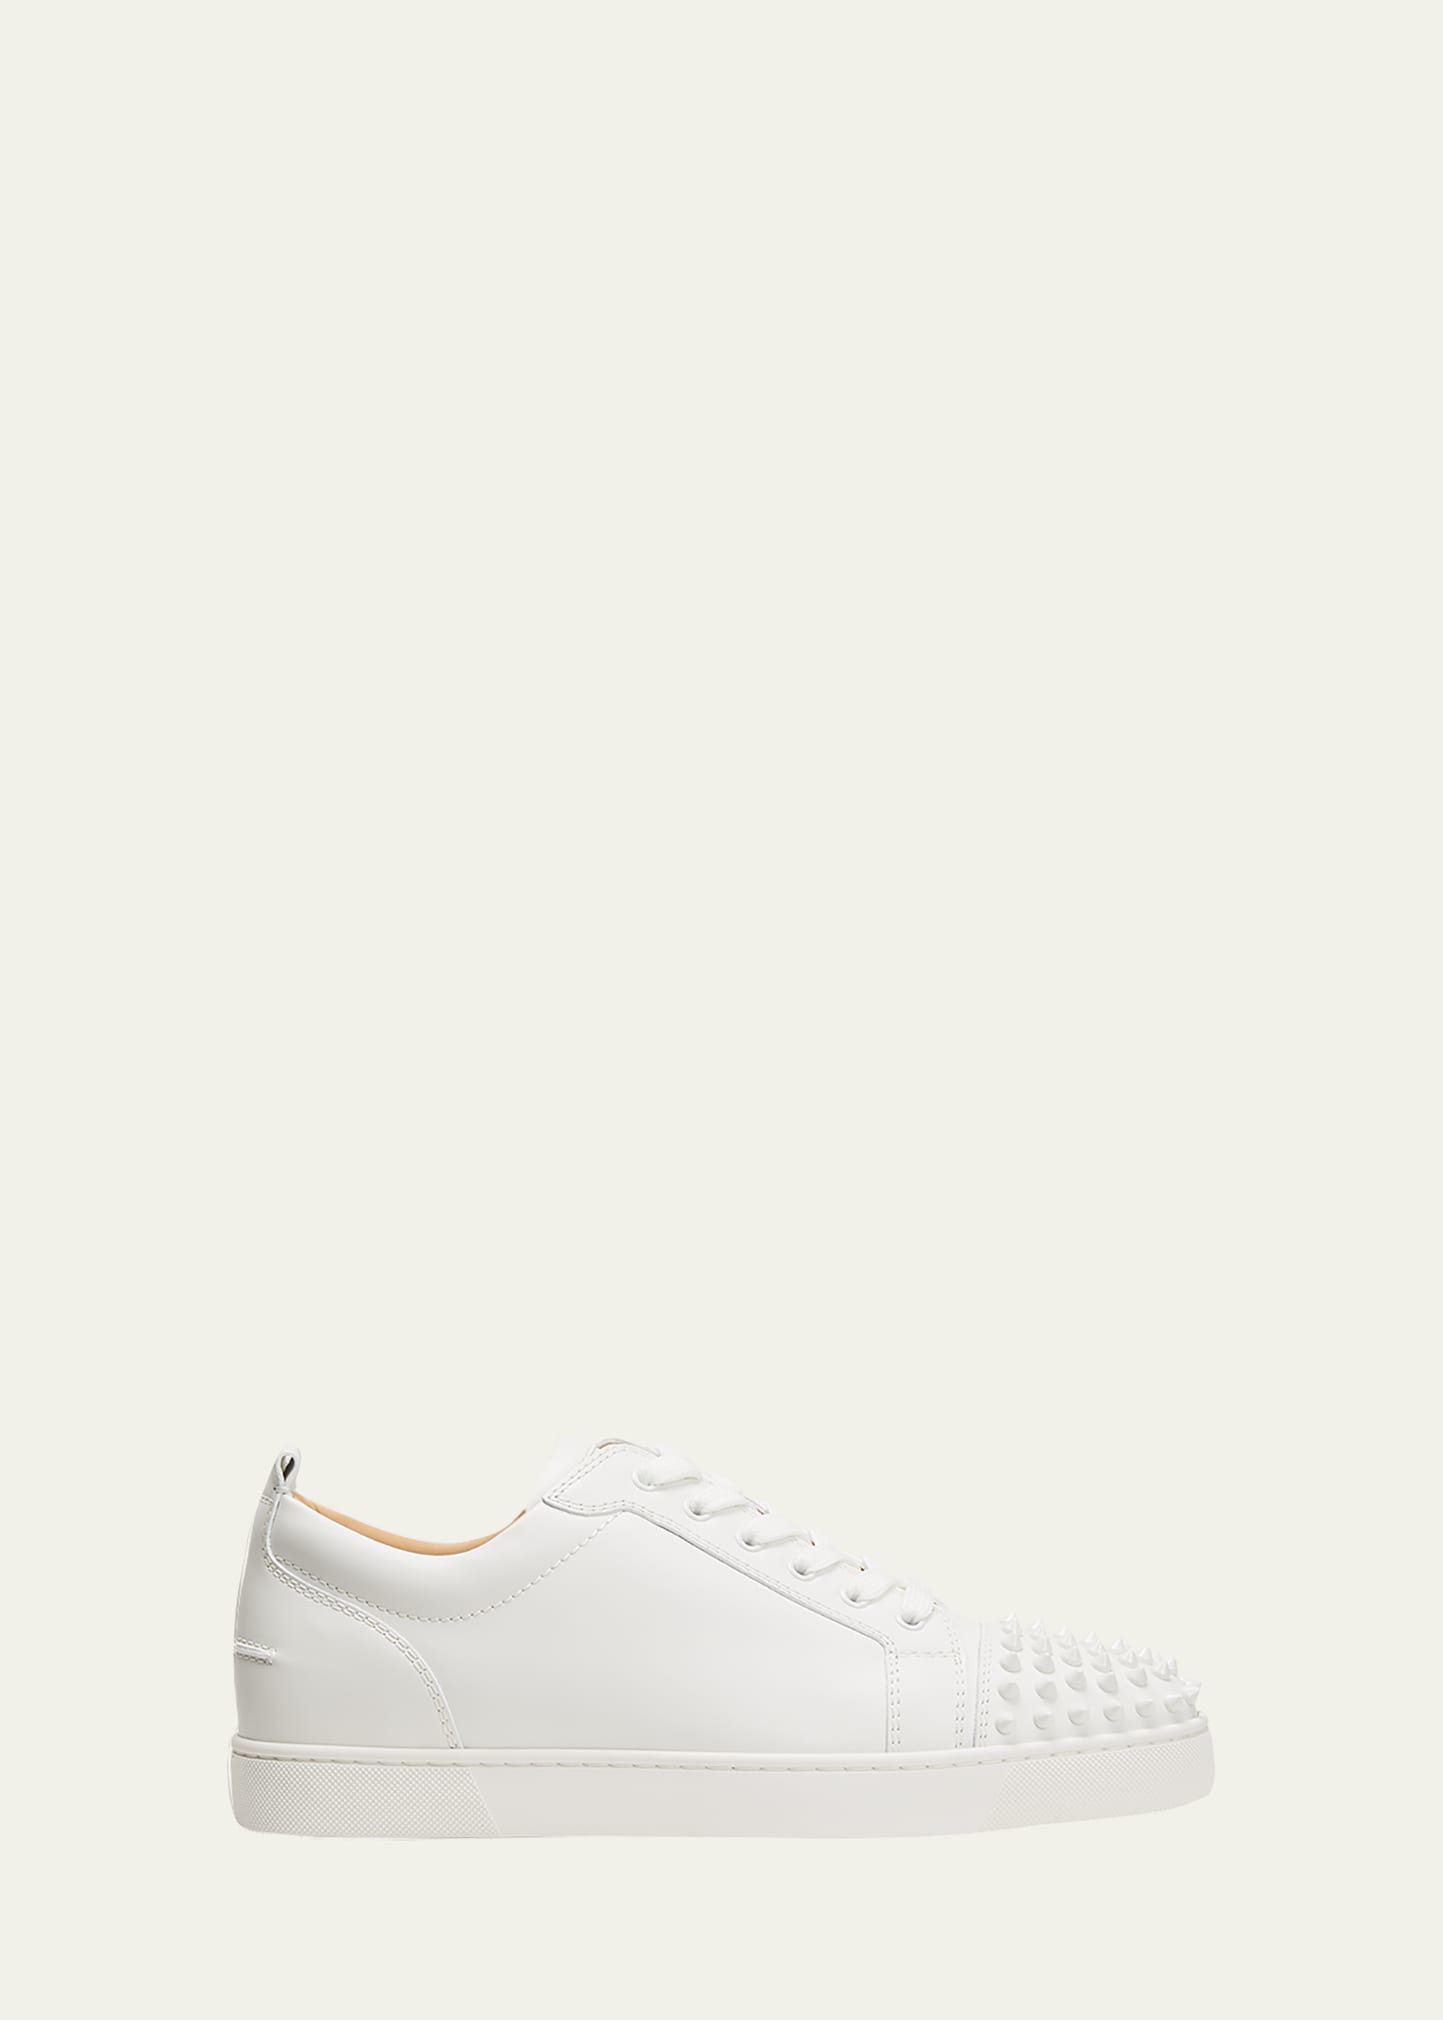 Christian Louboutin Men's Louis Junior Spiked Low-top Sneakers In White